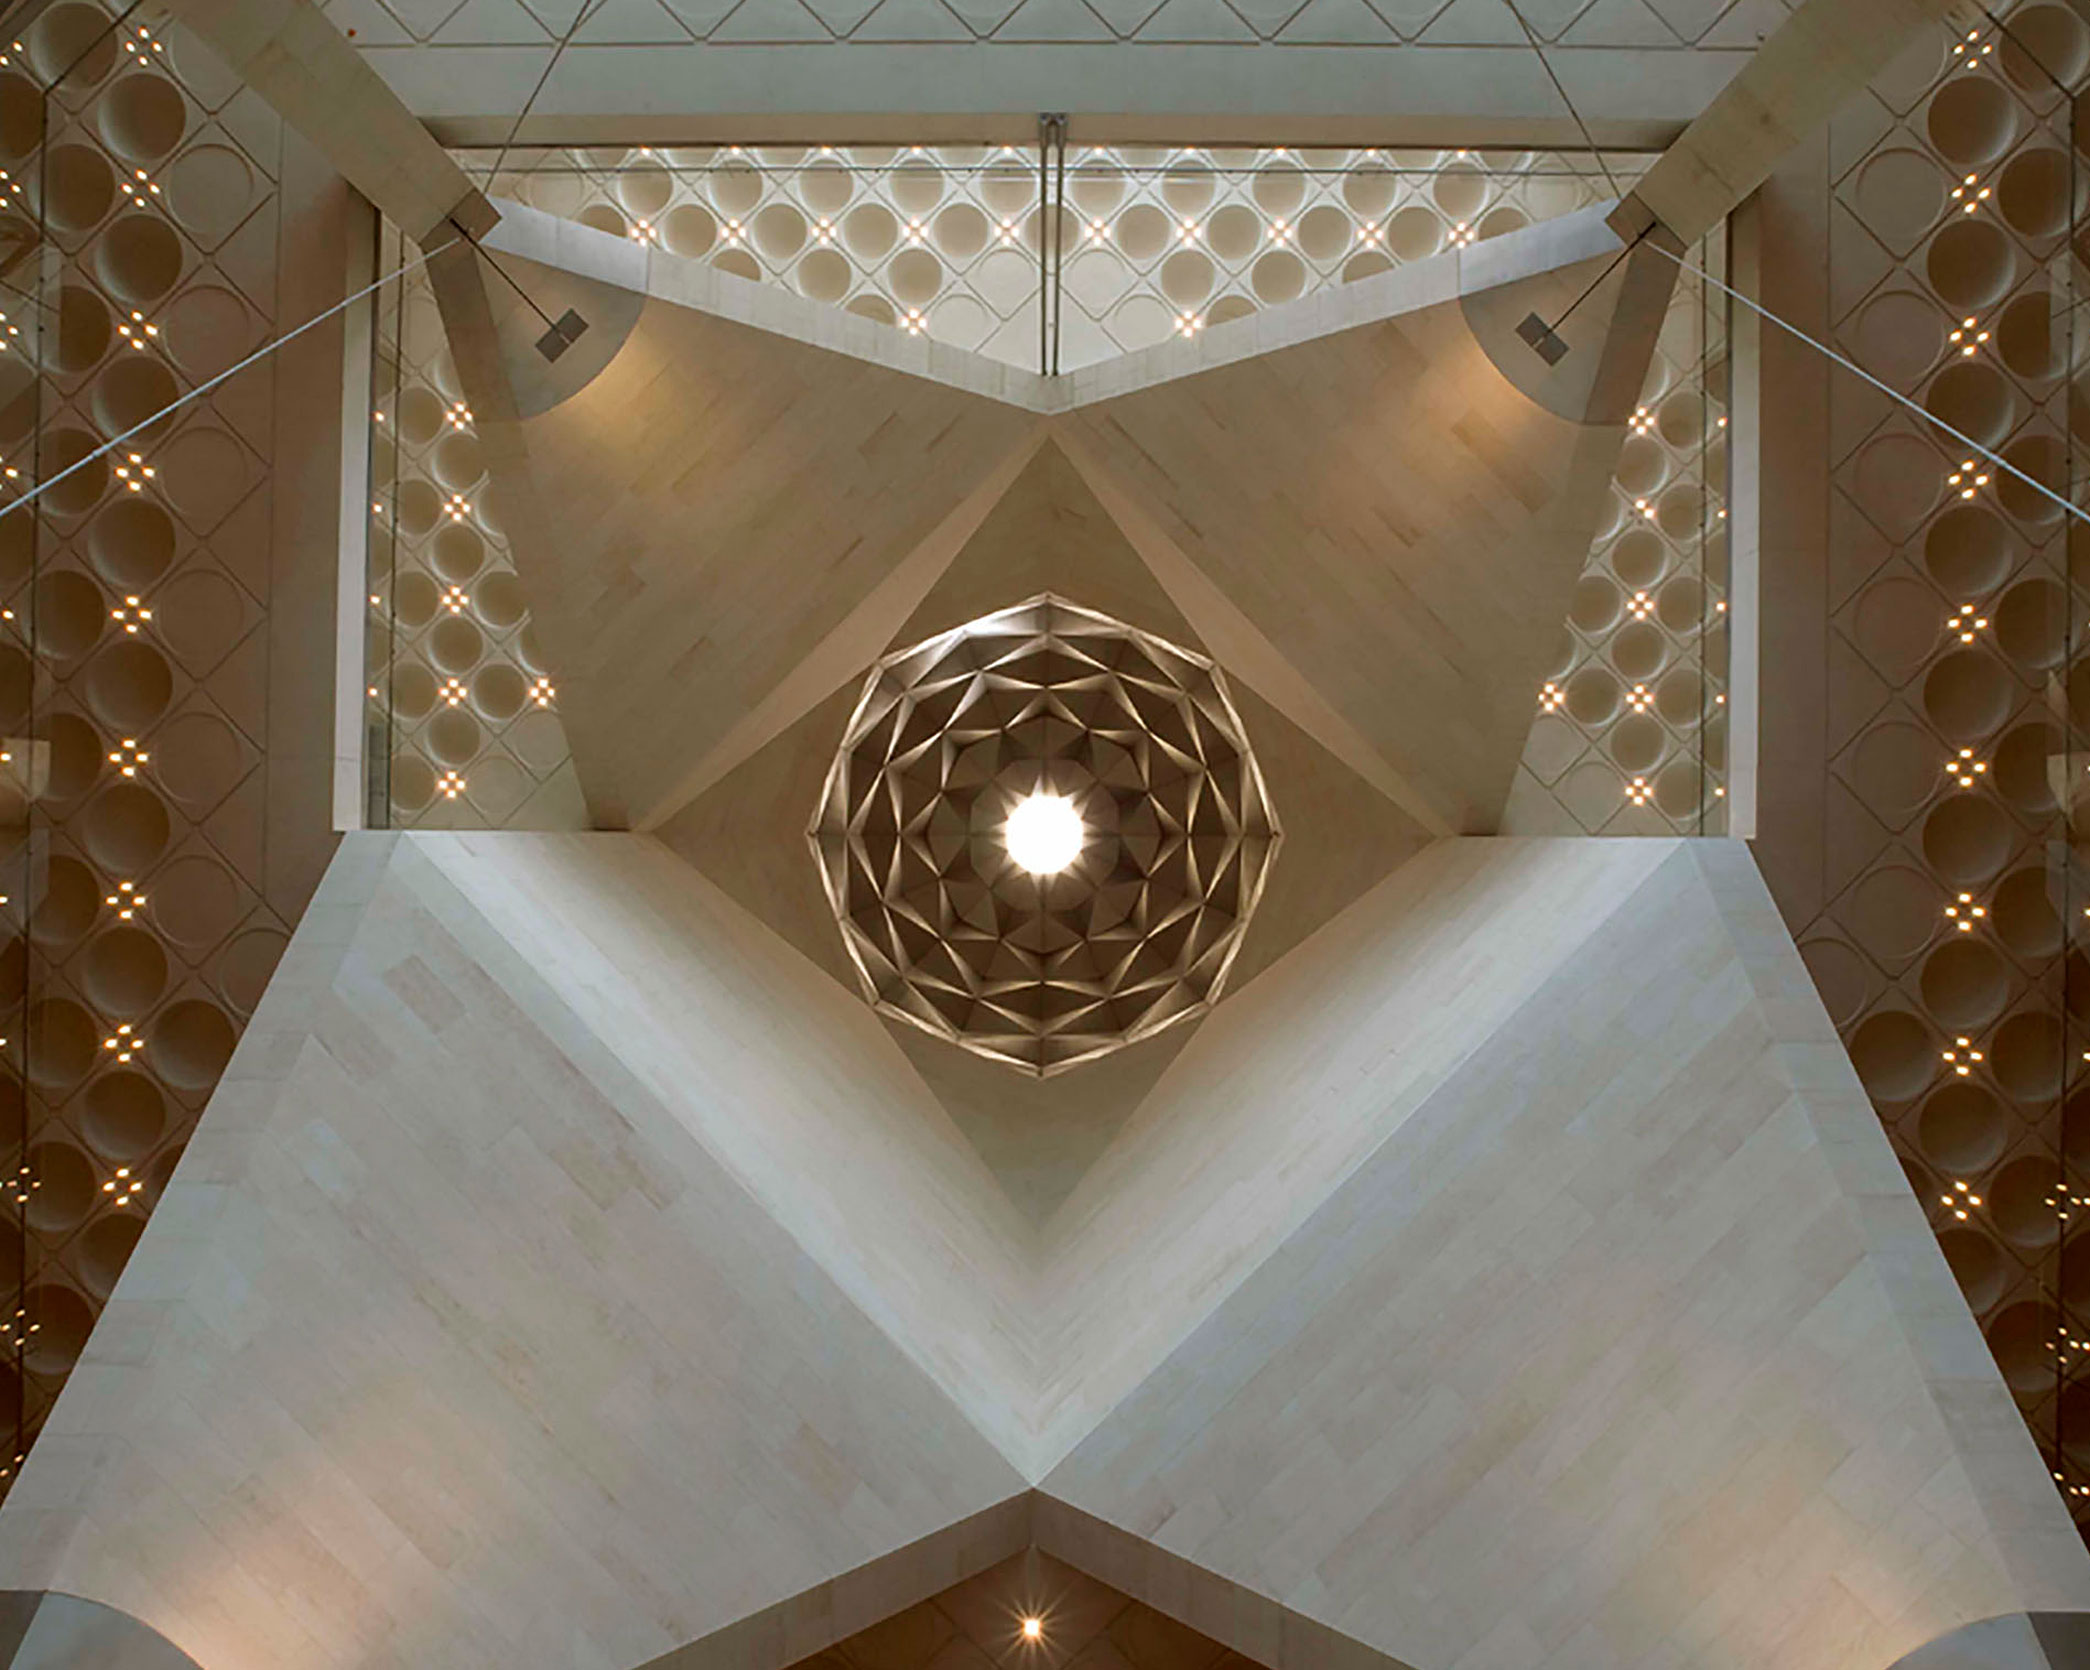 Ceiling of the Museum of Islamic Arts